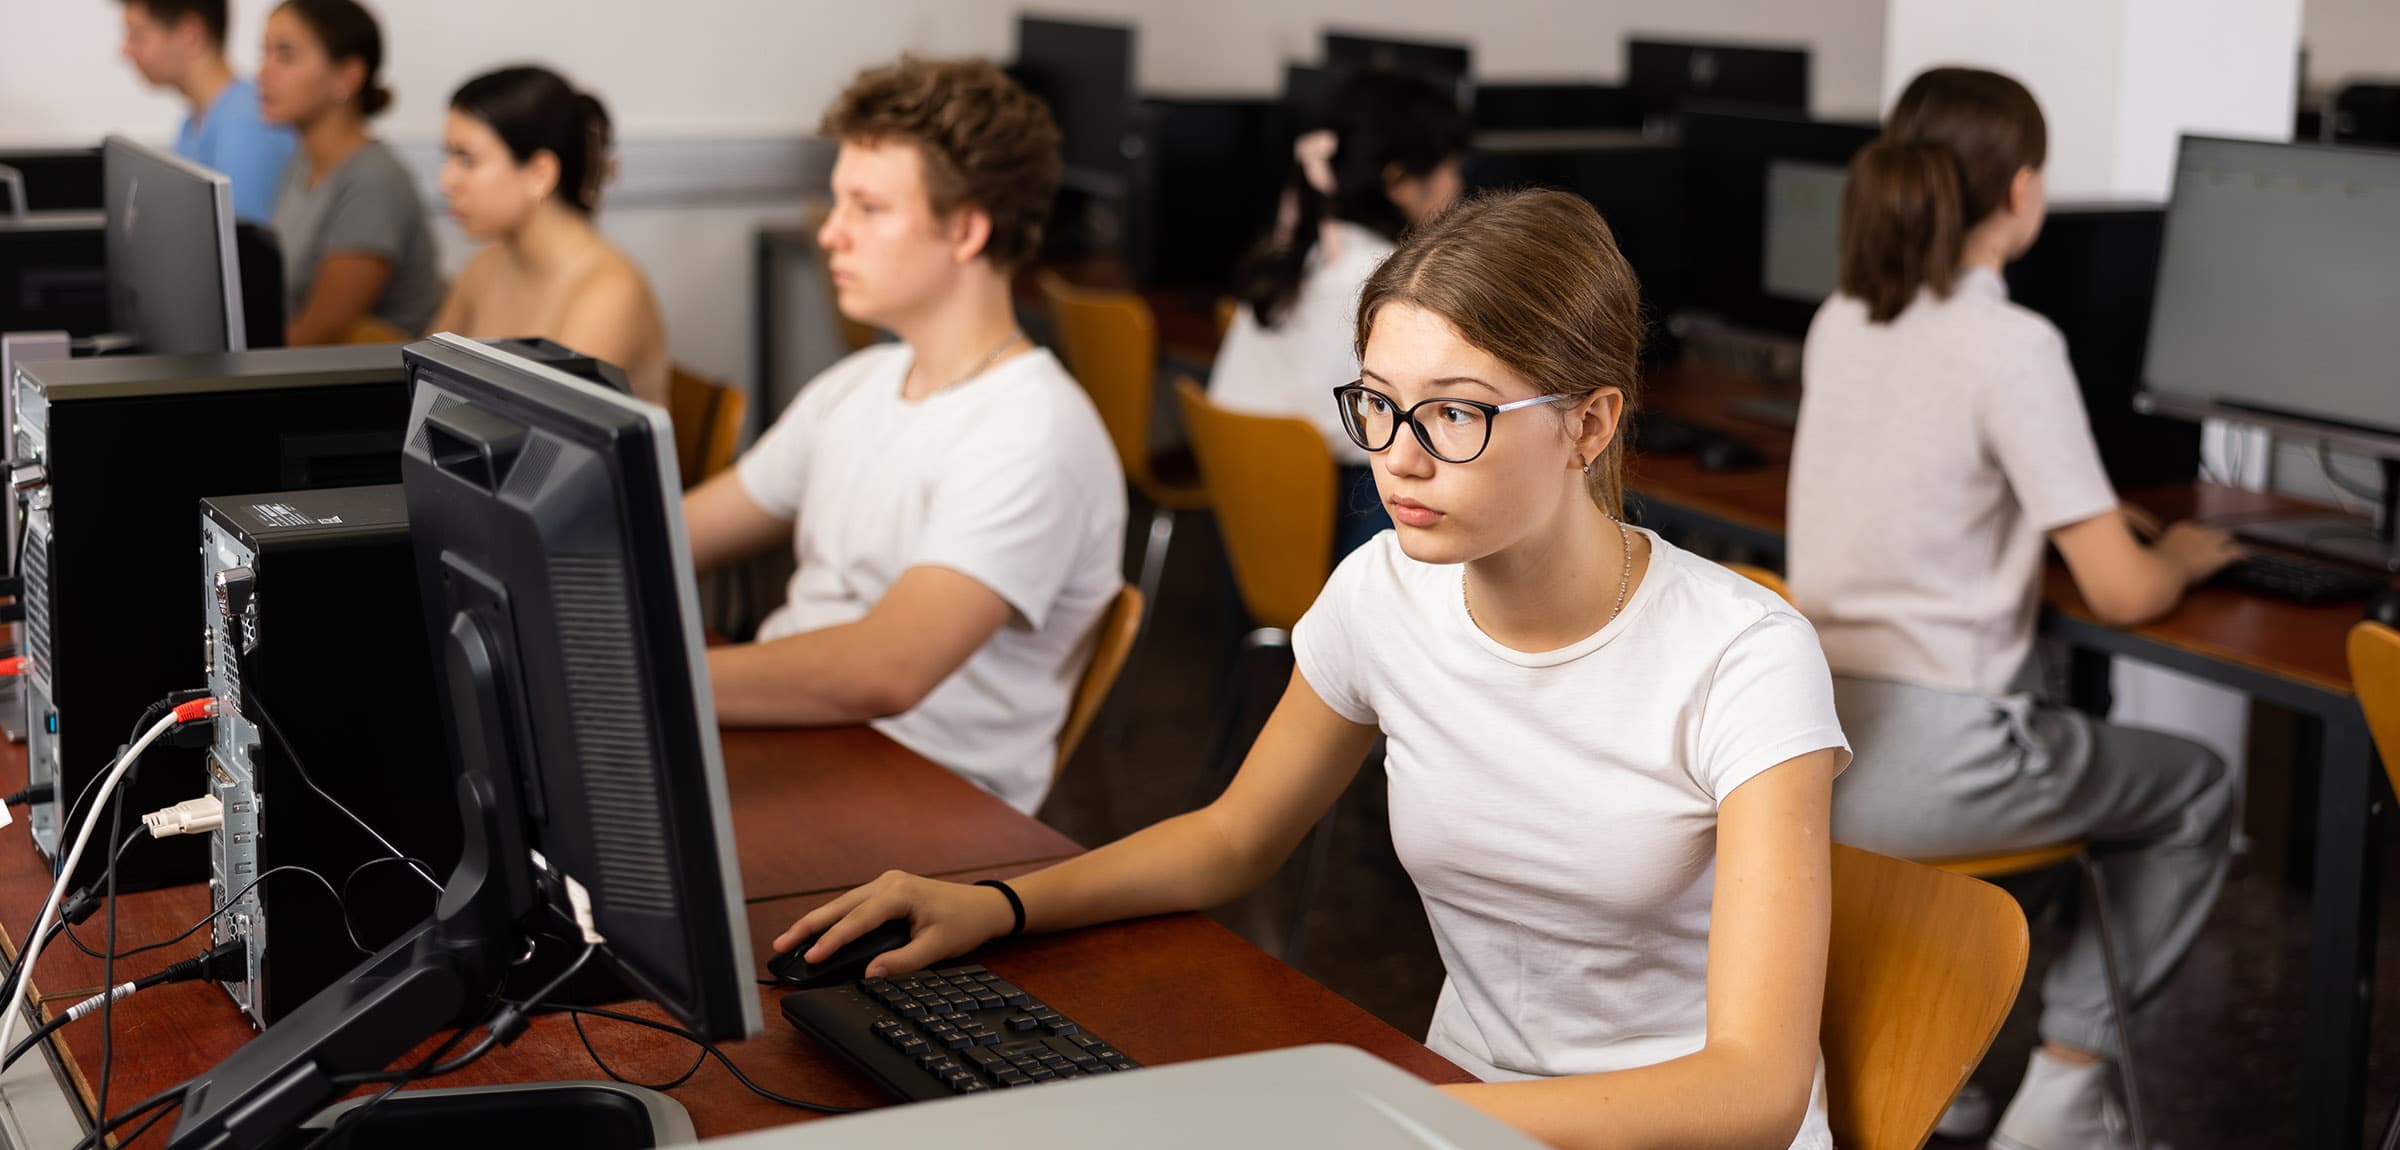 Students seated in a computer lab